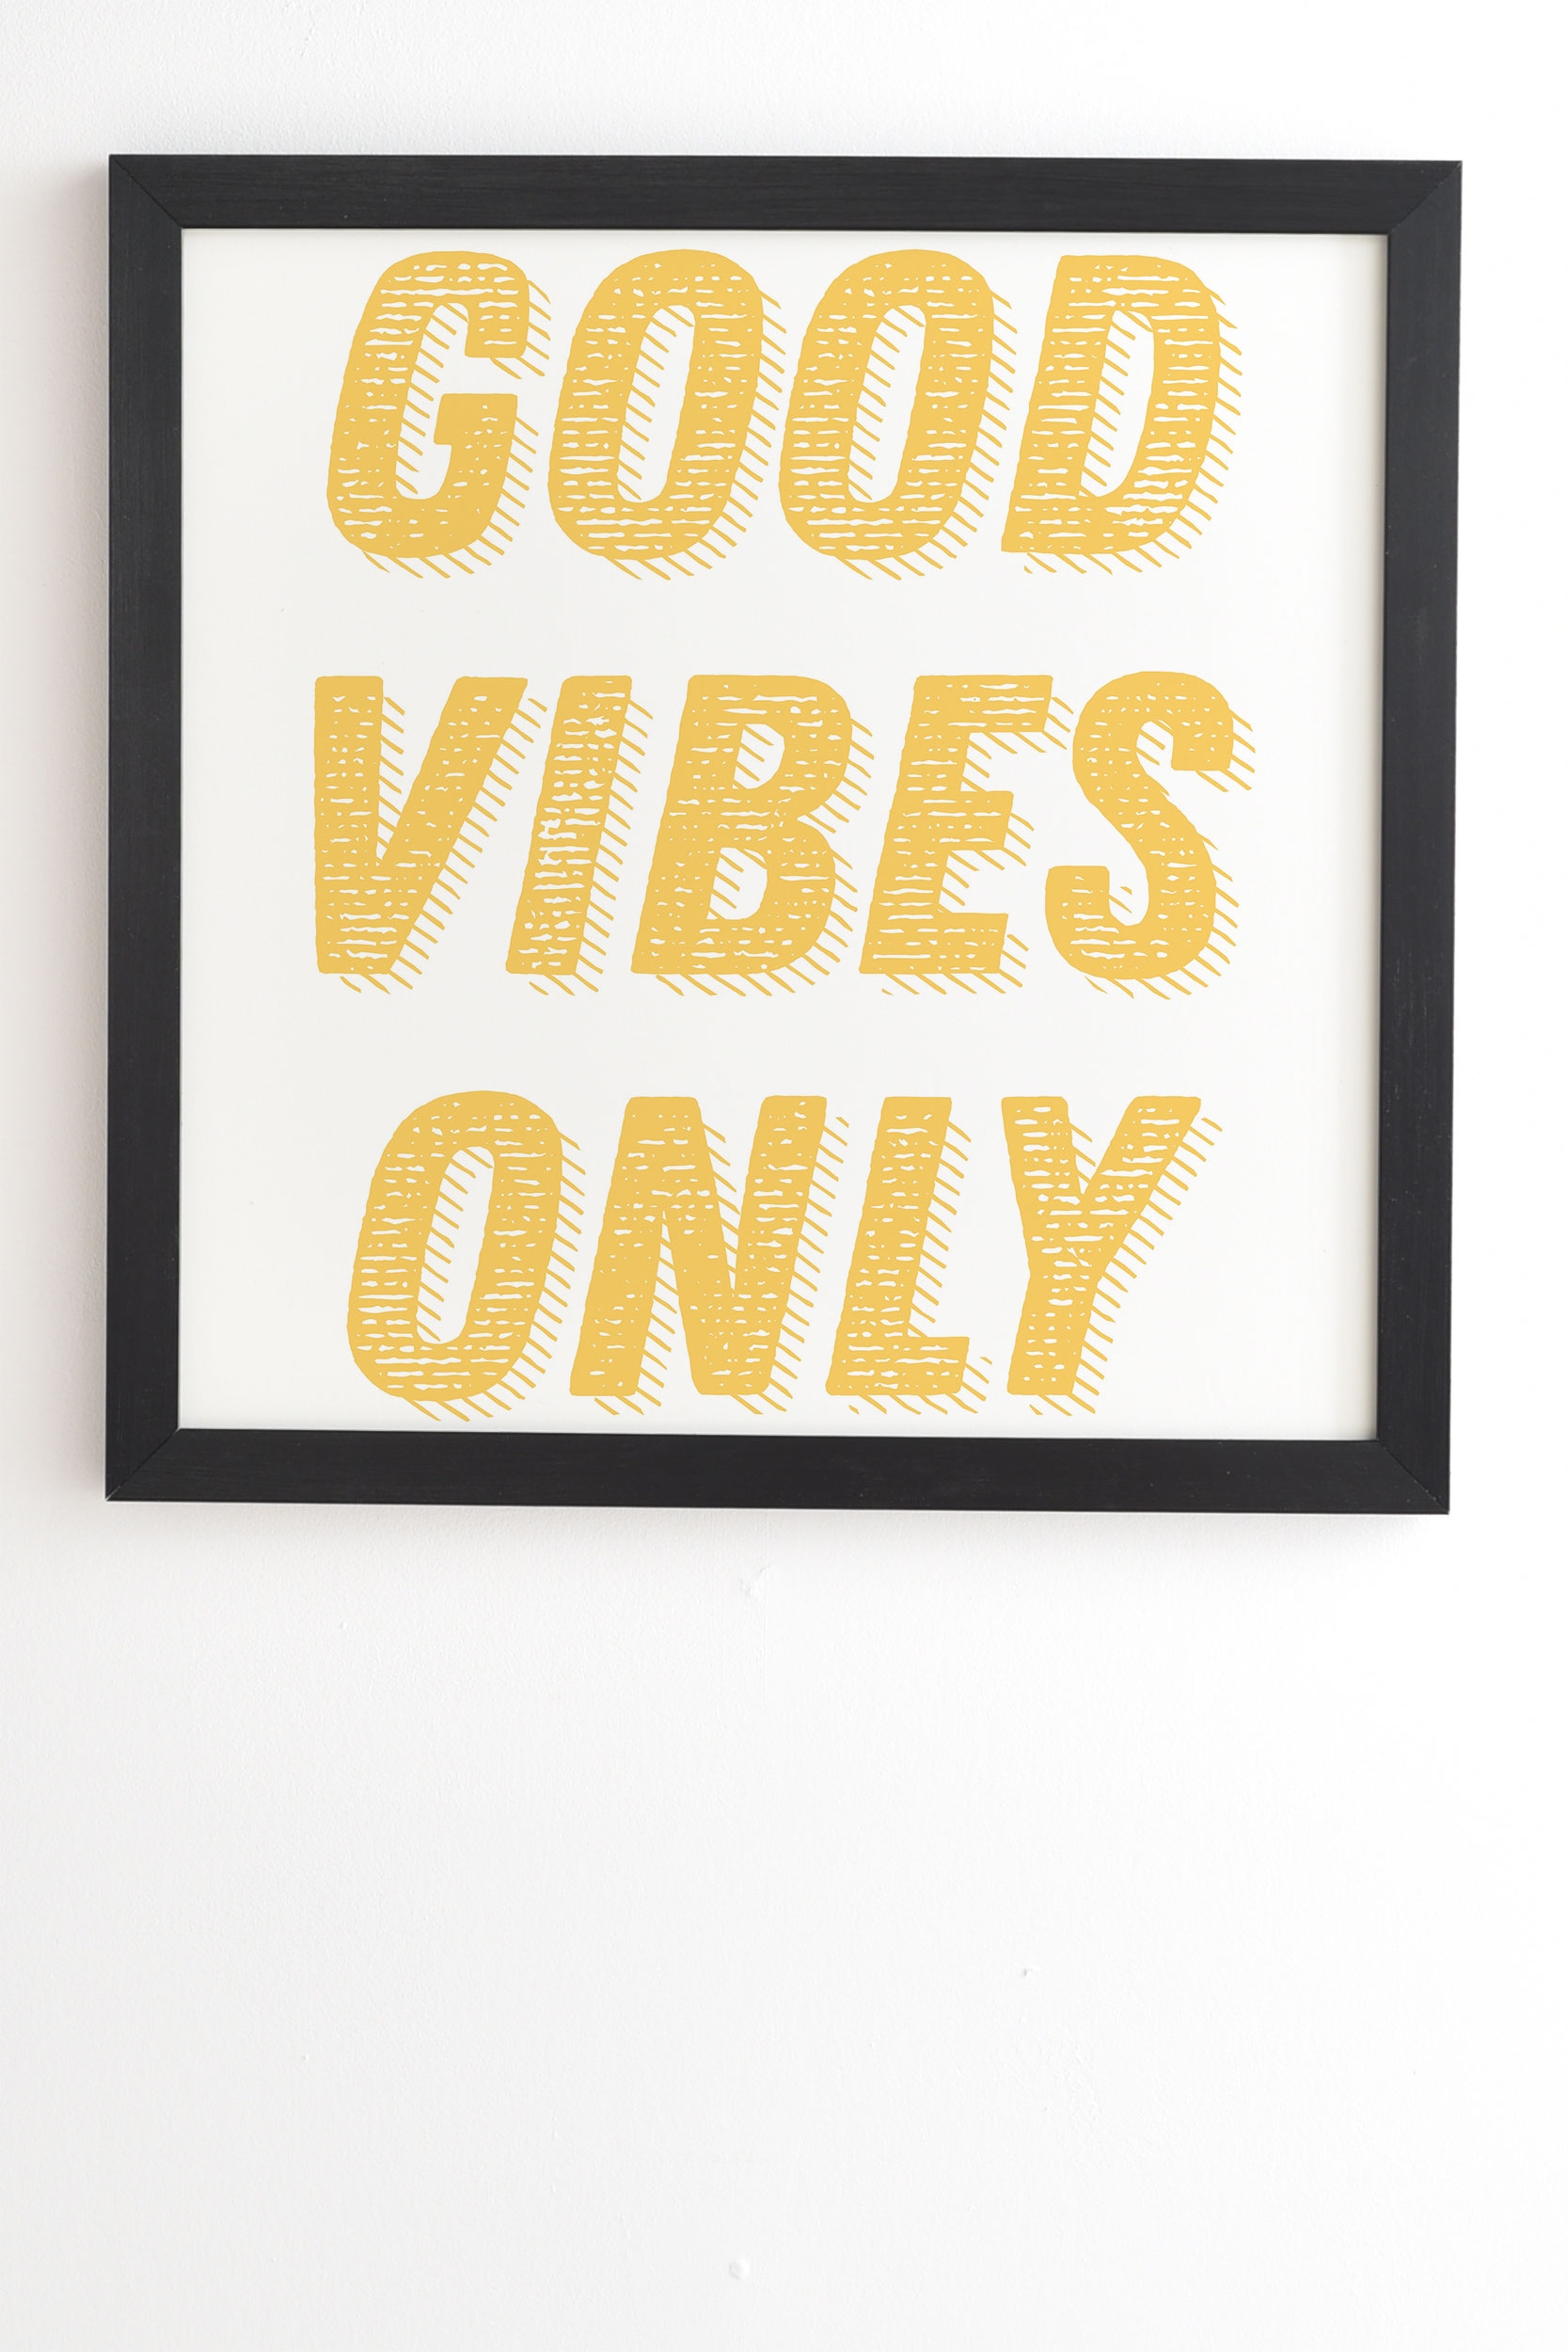 Good Vibes Only Bold Typograph by June Journal - Framed Wall Art Basic Black 8" x 9.5" - Image 1